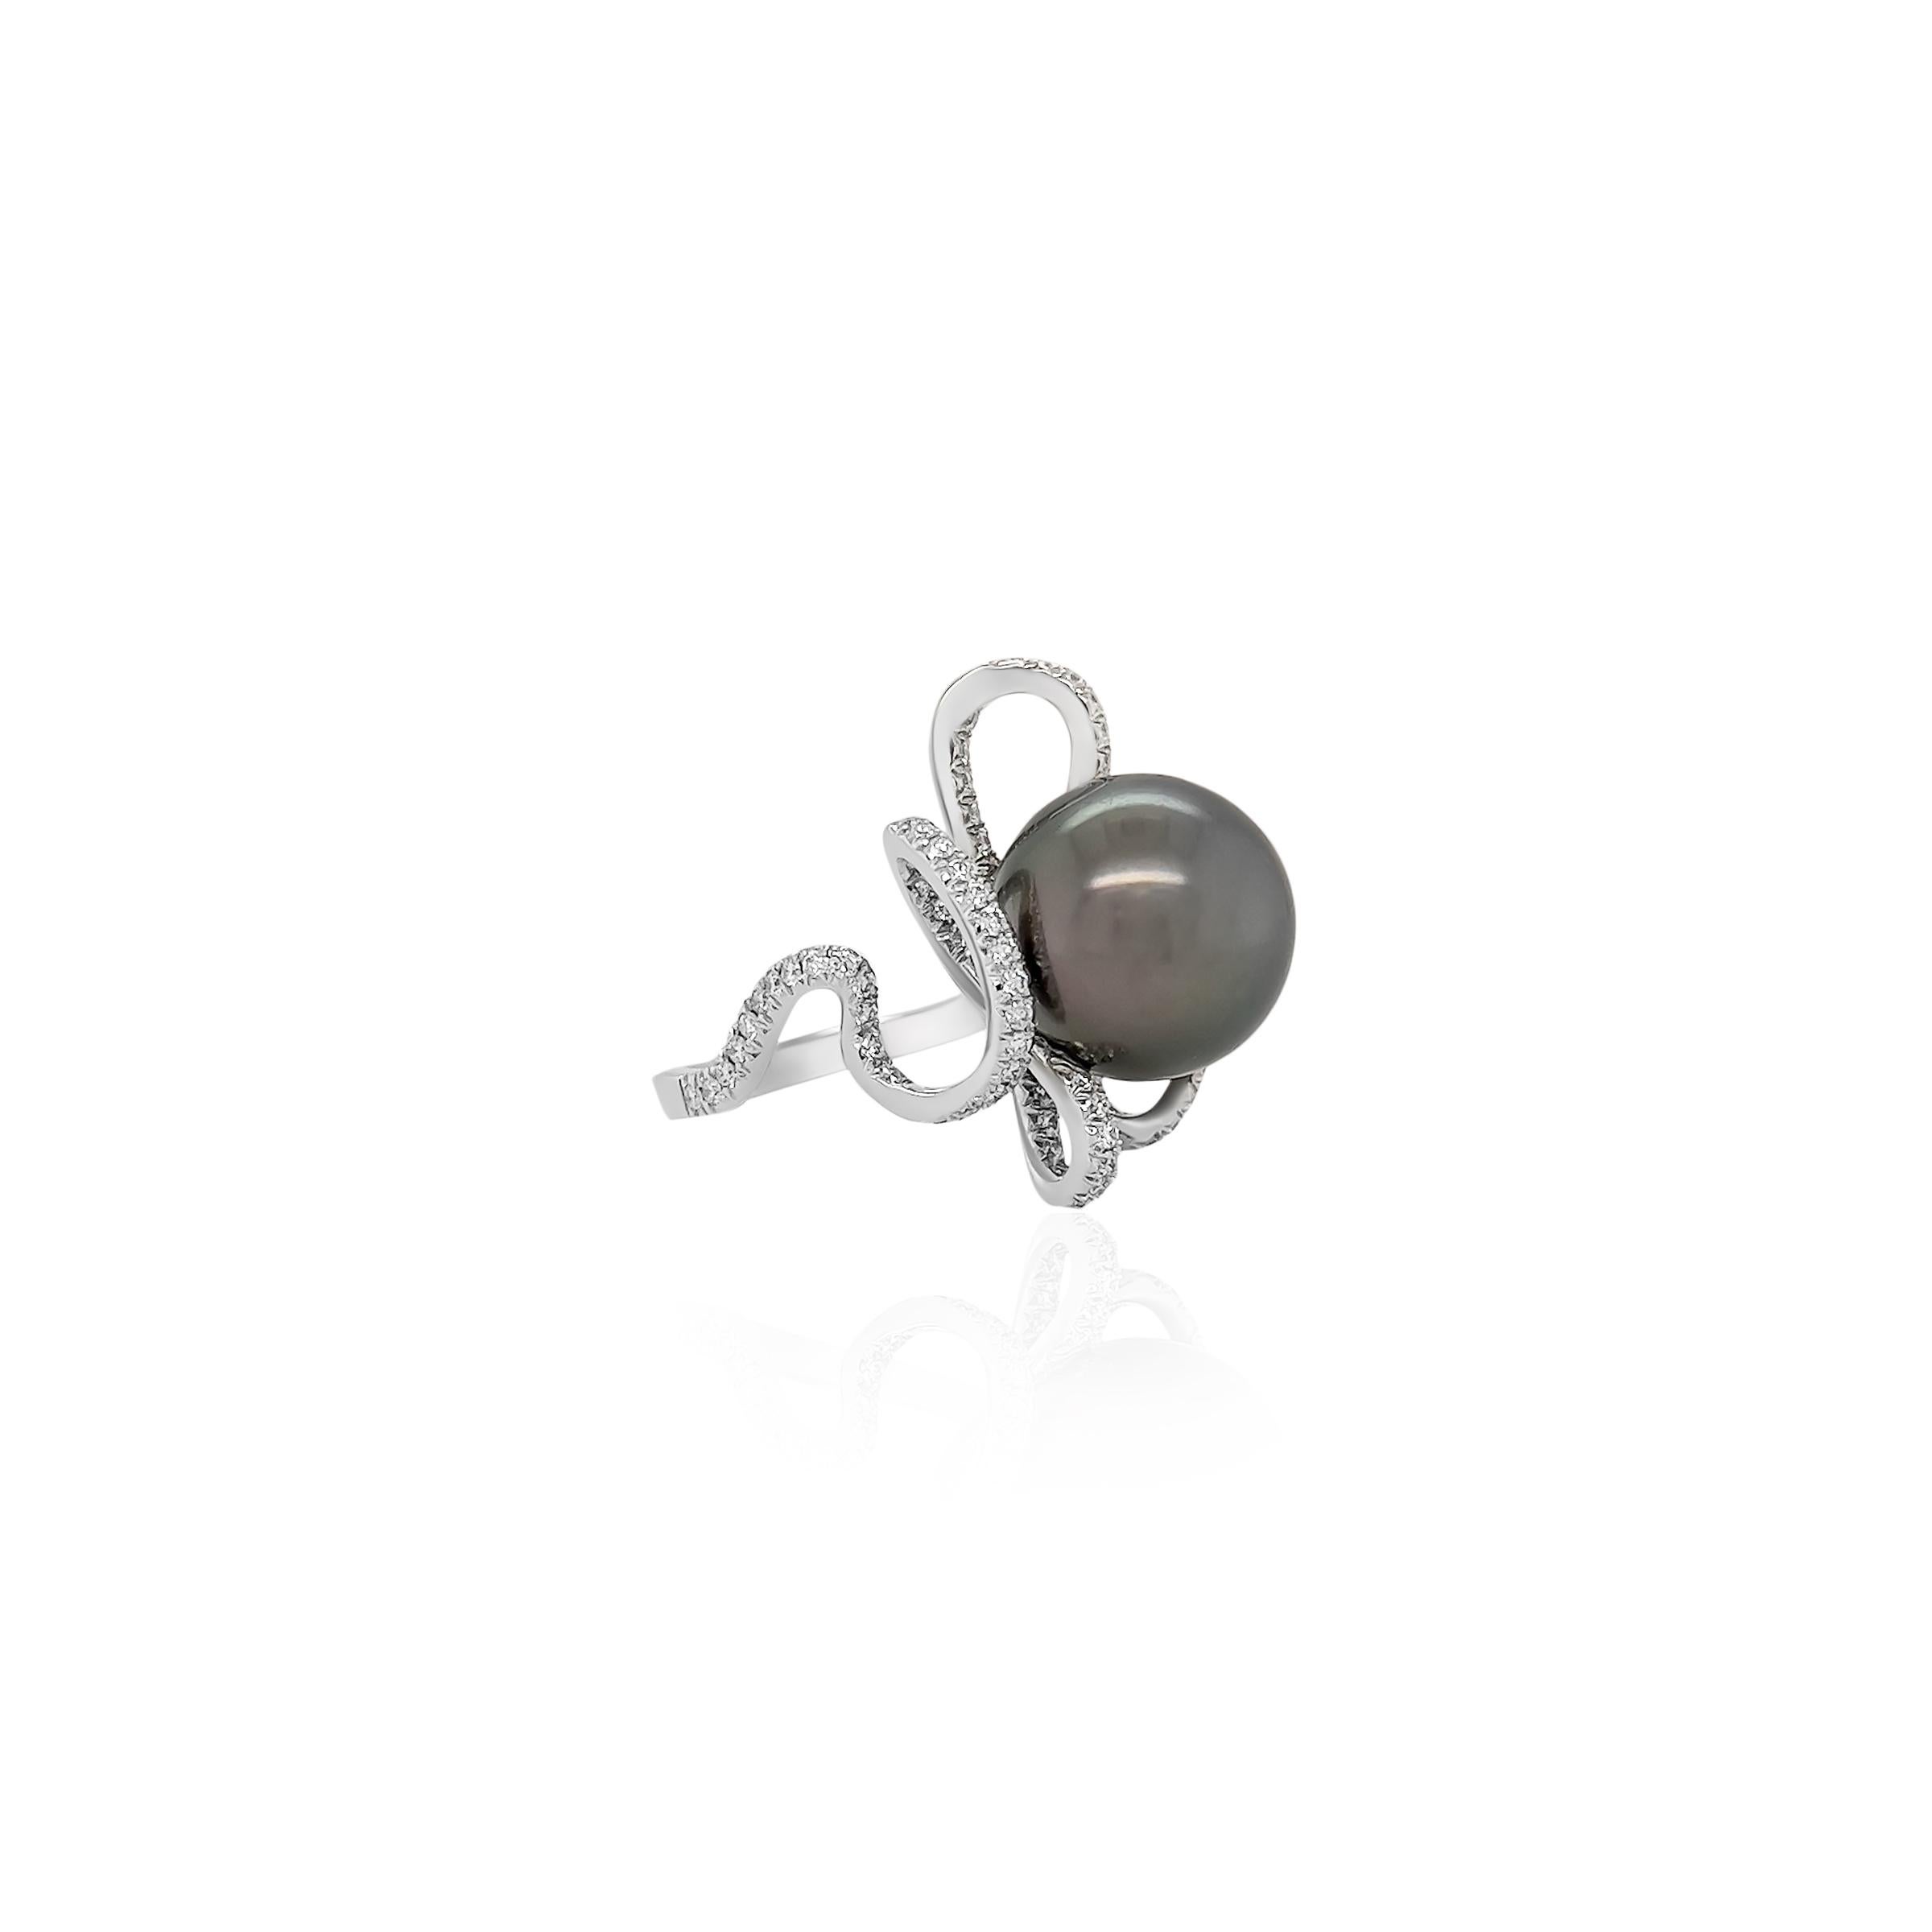 This ring embodies elegance and originality and showcases a mesmerizing spiral design, meticulously encrusted with natural diamonds. At the heart of the ring lies a beautiful grayish black 15mm Tahitian Pearl. All set in 18k white gold. 

The